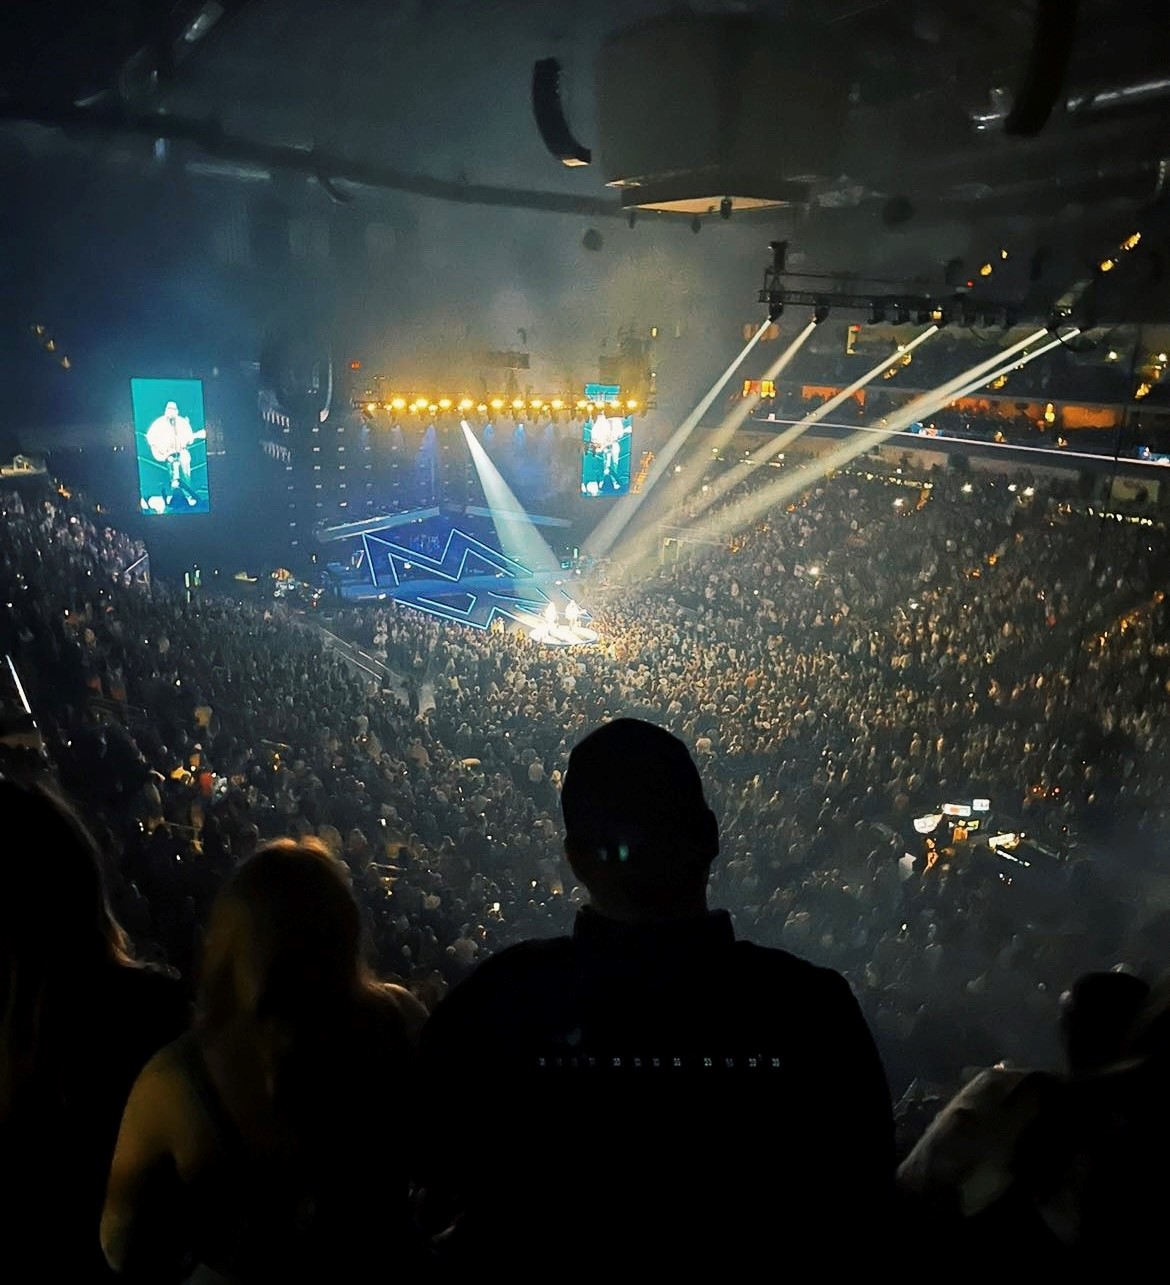 this is a photo of a concert